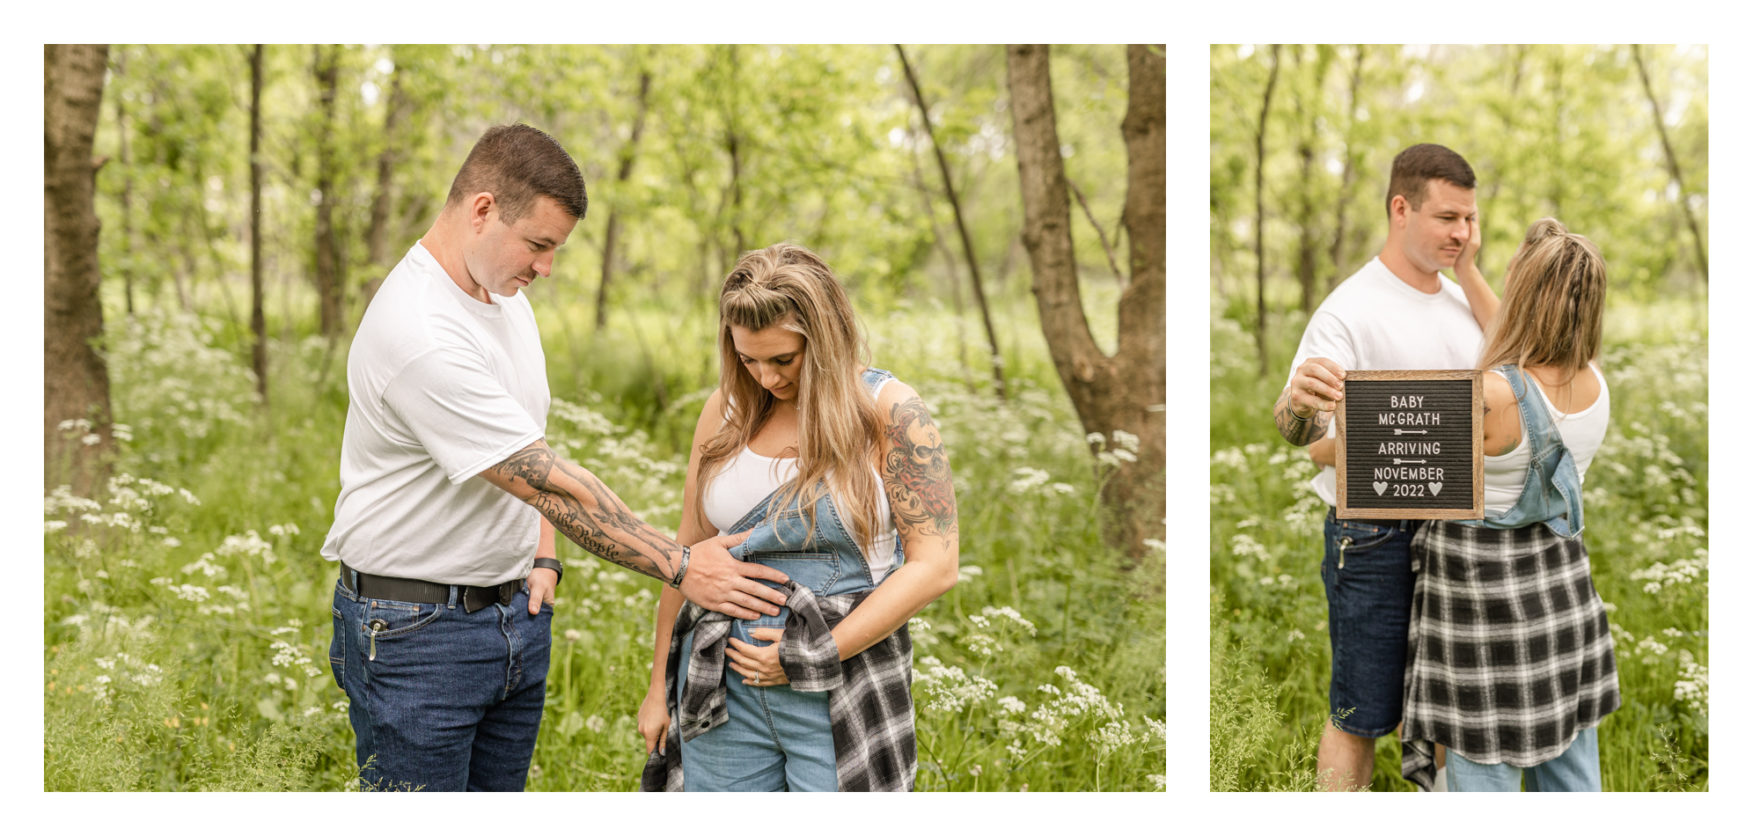 90's theme. 90's photo session. 90's awkward photos. 90's couple photos. 90's couple portraits. 90's couple glamour shots. 90's pregnancy announcement. new pair of genes. Jean overalls. Jorts. Dad Jeans. Mom Jeans. New balances. Awkward Couple Poses. Awkward portrait session. 